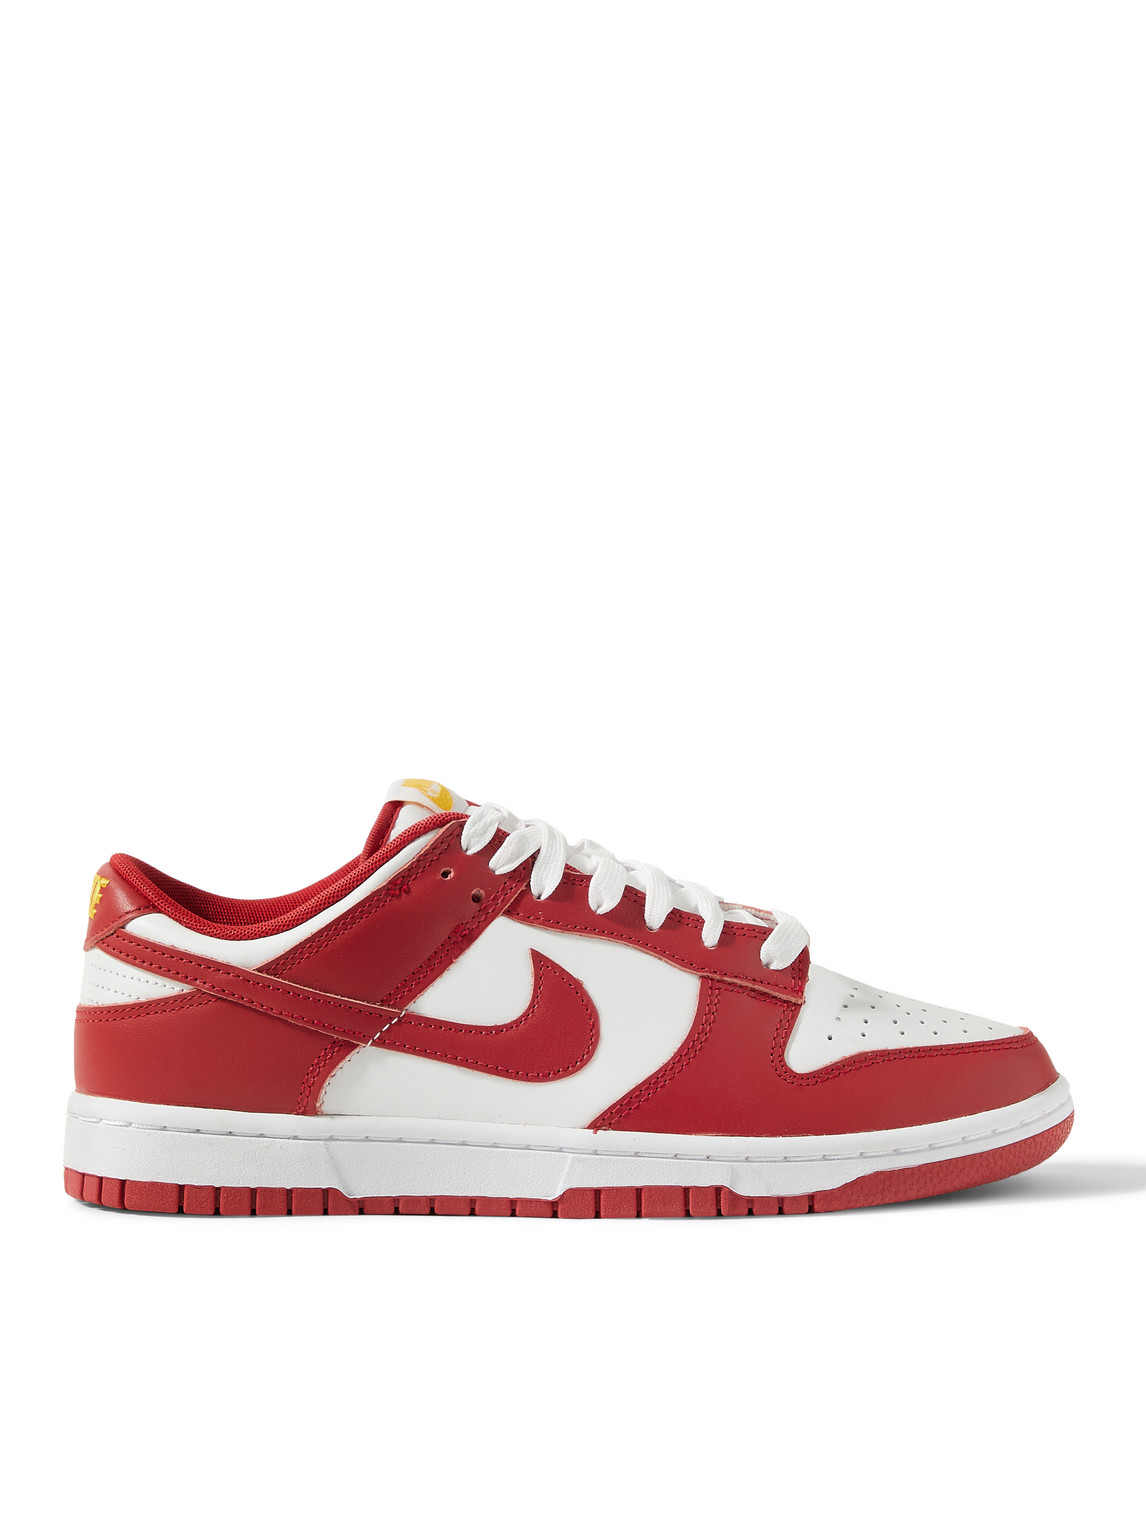 Dunk Low Retro Leather Sneakers